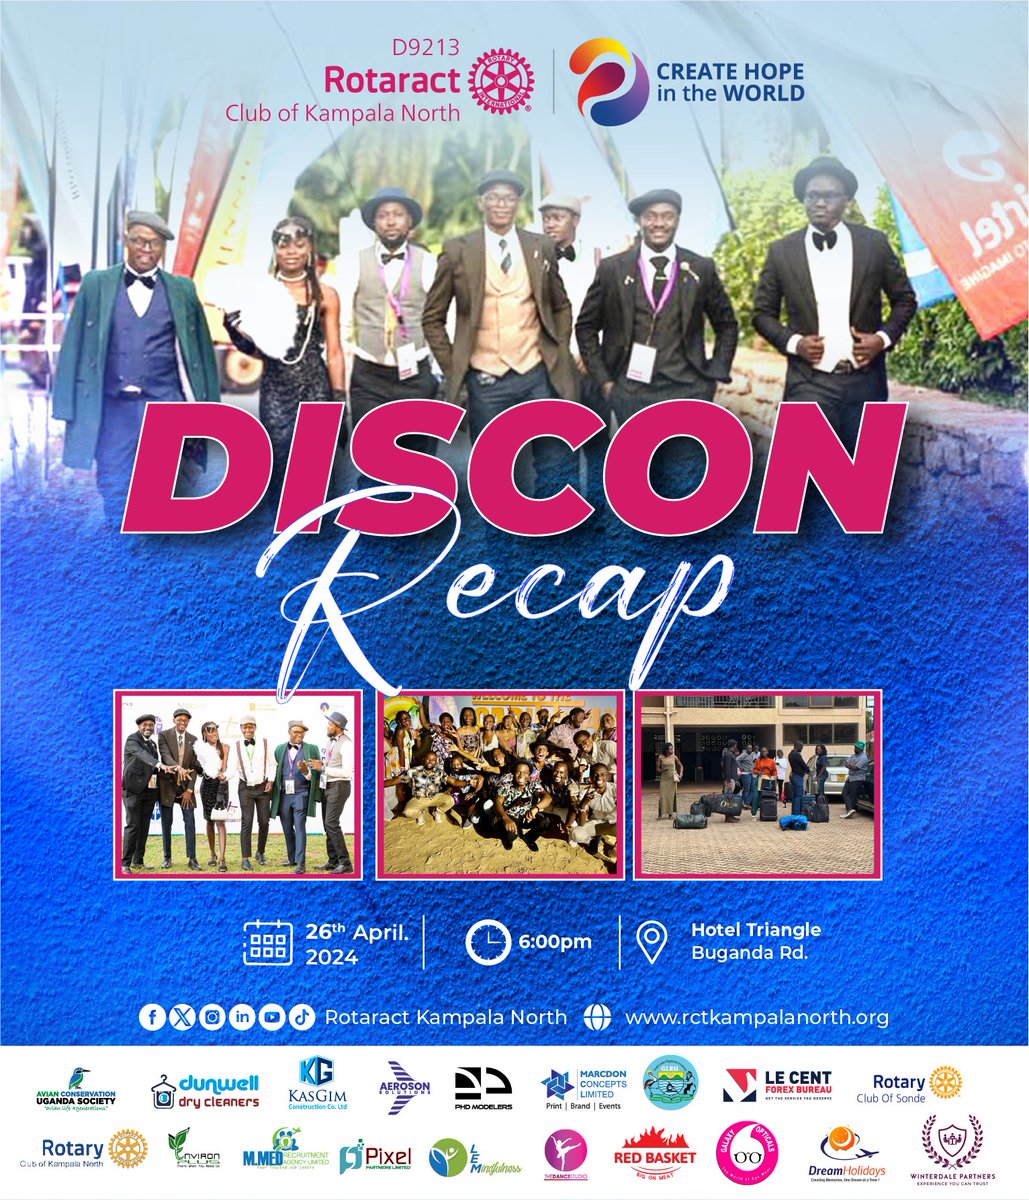 Join us today at Hotel Triangle for a thrilling #99thDISCON Recap fellowship! Come and hear all about the insightful experiences from our amazing delegates. Don't miss out!